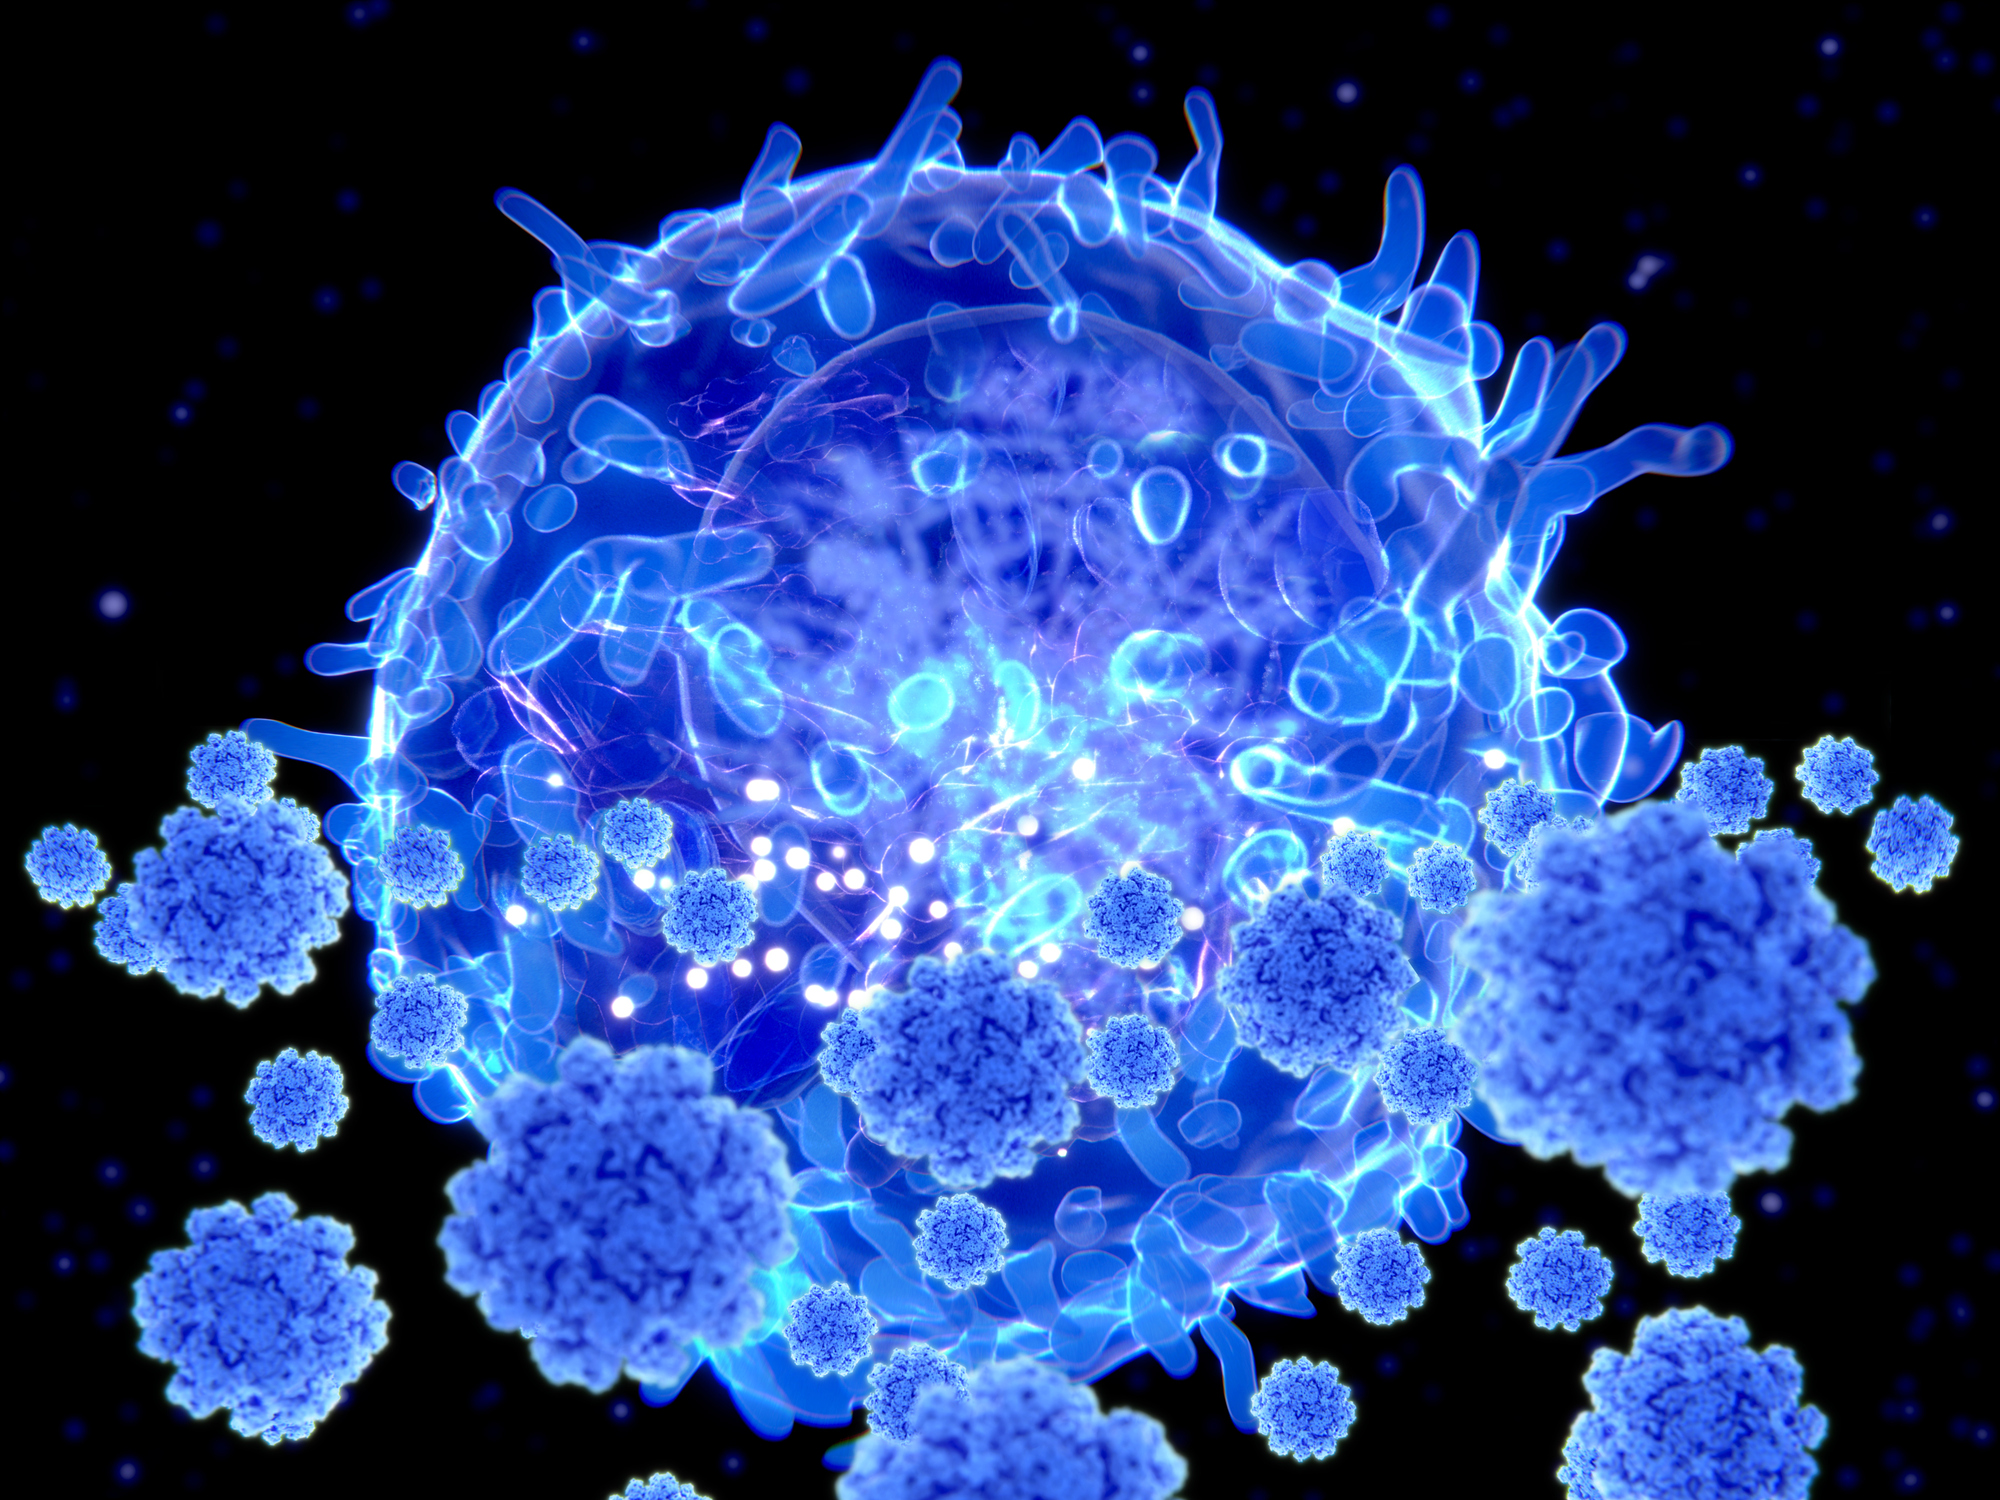 Illustration of a T cell targeting SARS-CoV-2 particles